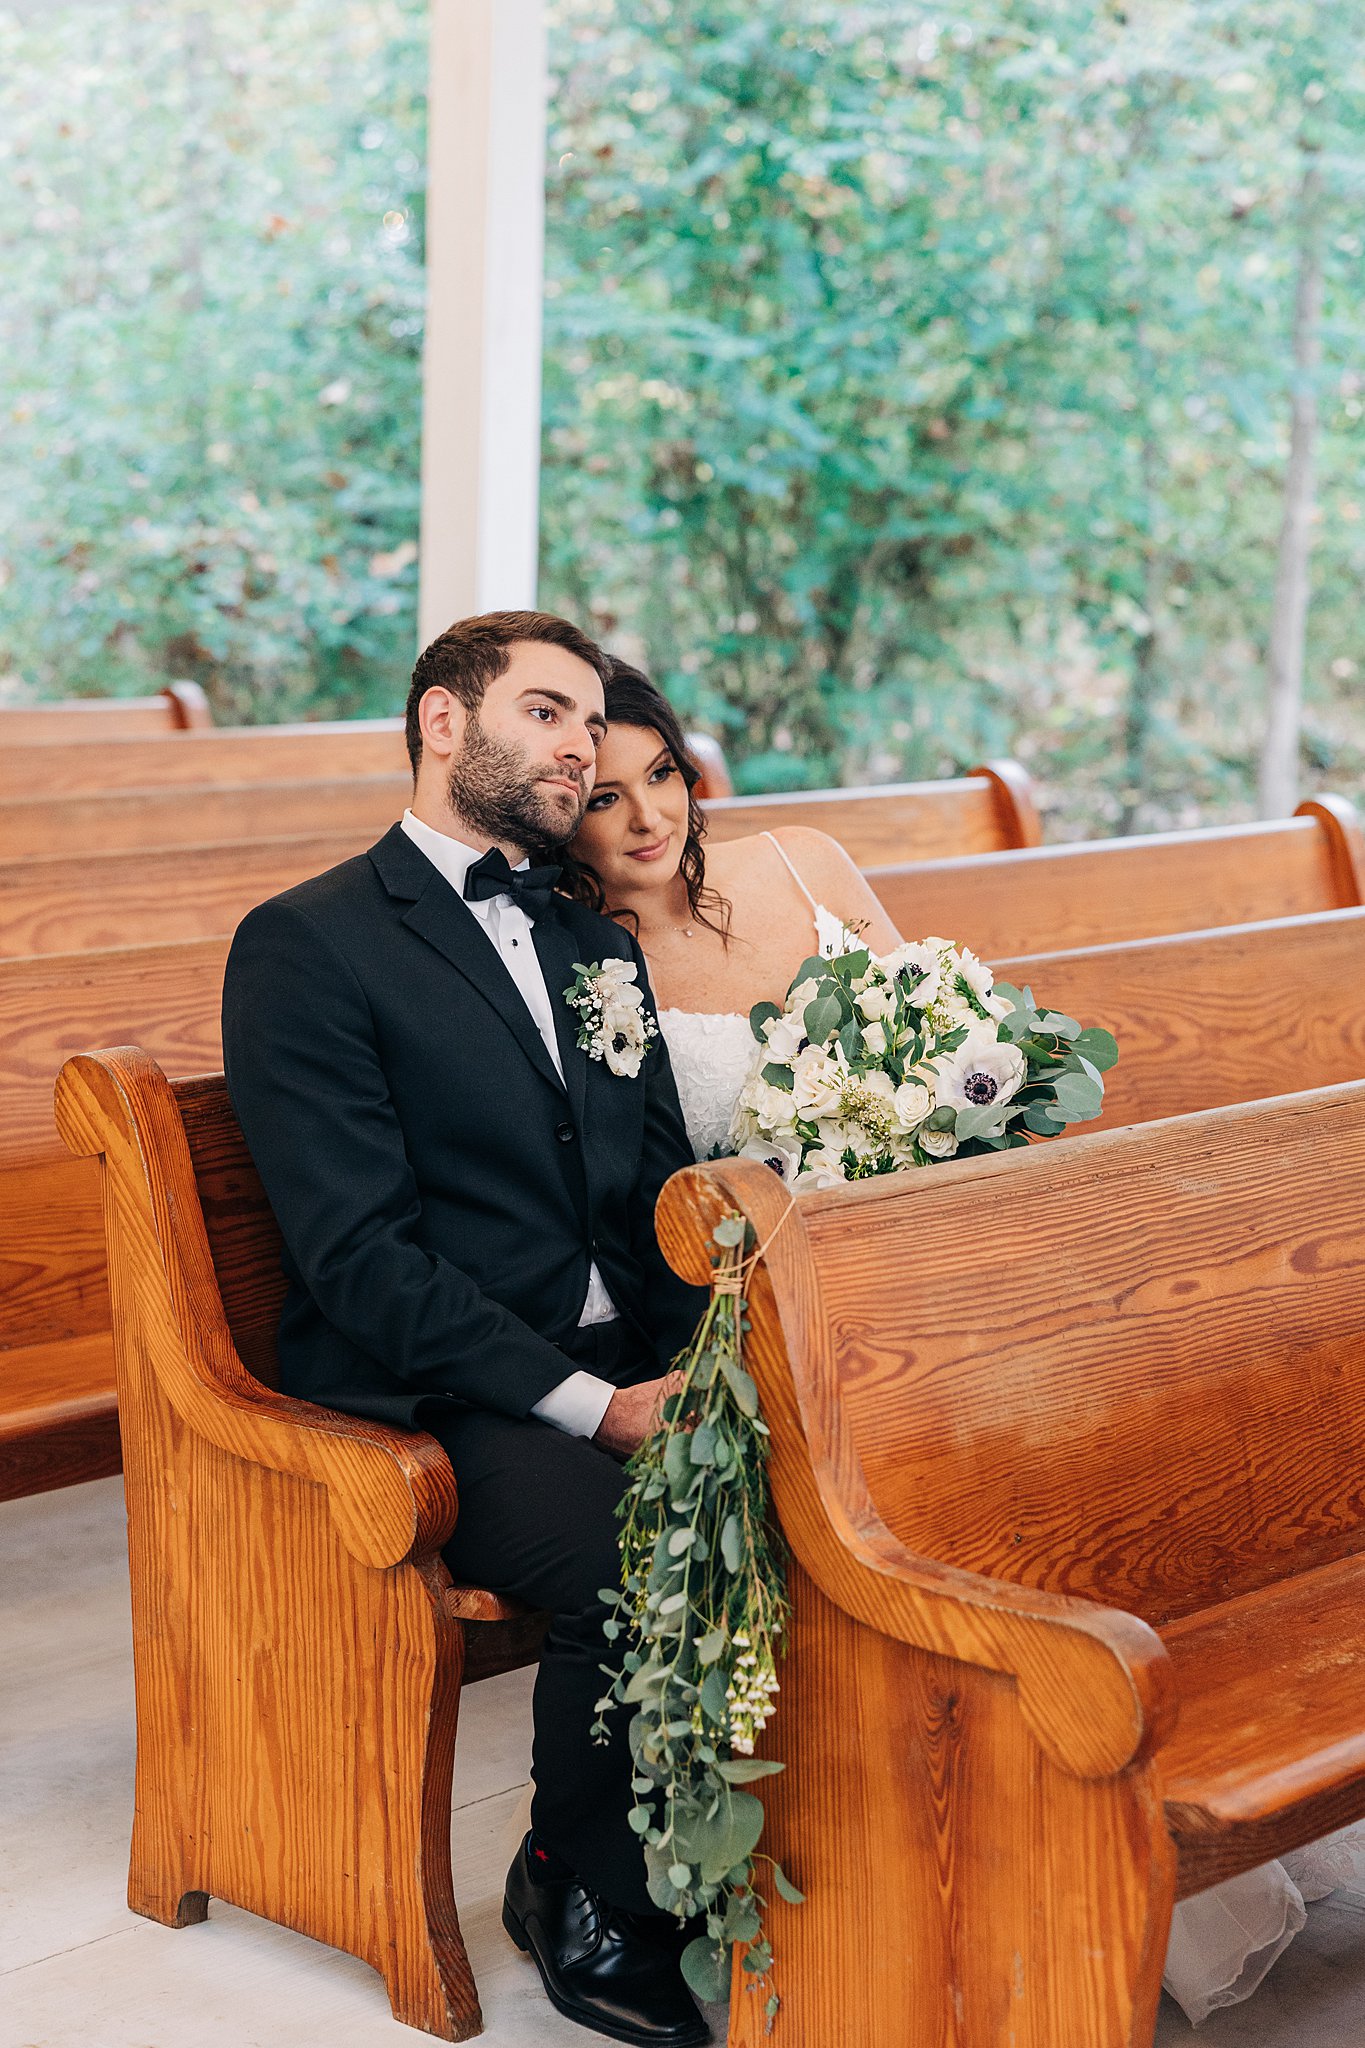 Newlyweds snuggle in a wooden pew at their cornealius properties wedding ceremony chapel